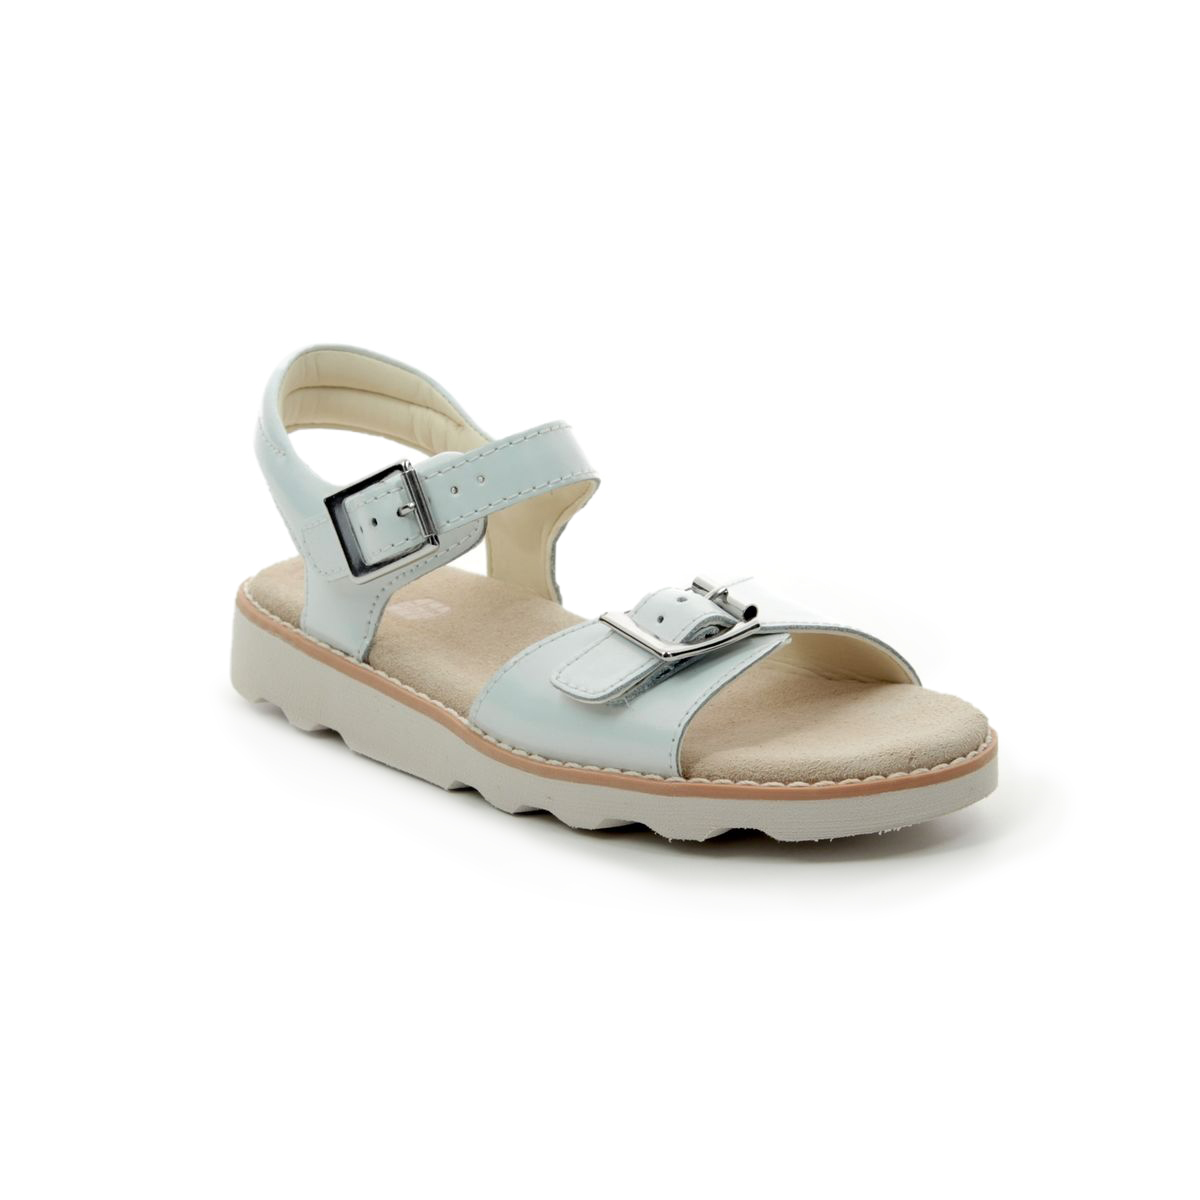 Crown Bloom Details about   Girls Clarks Casual Strapped Sandals 